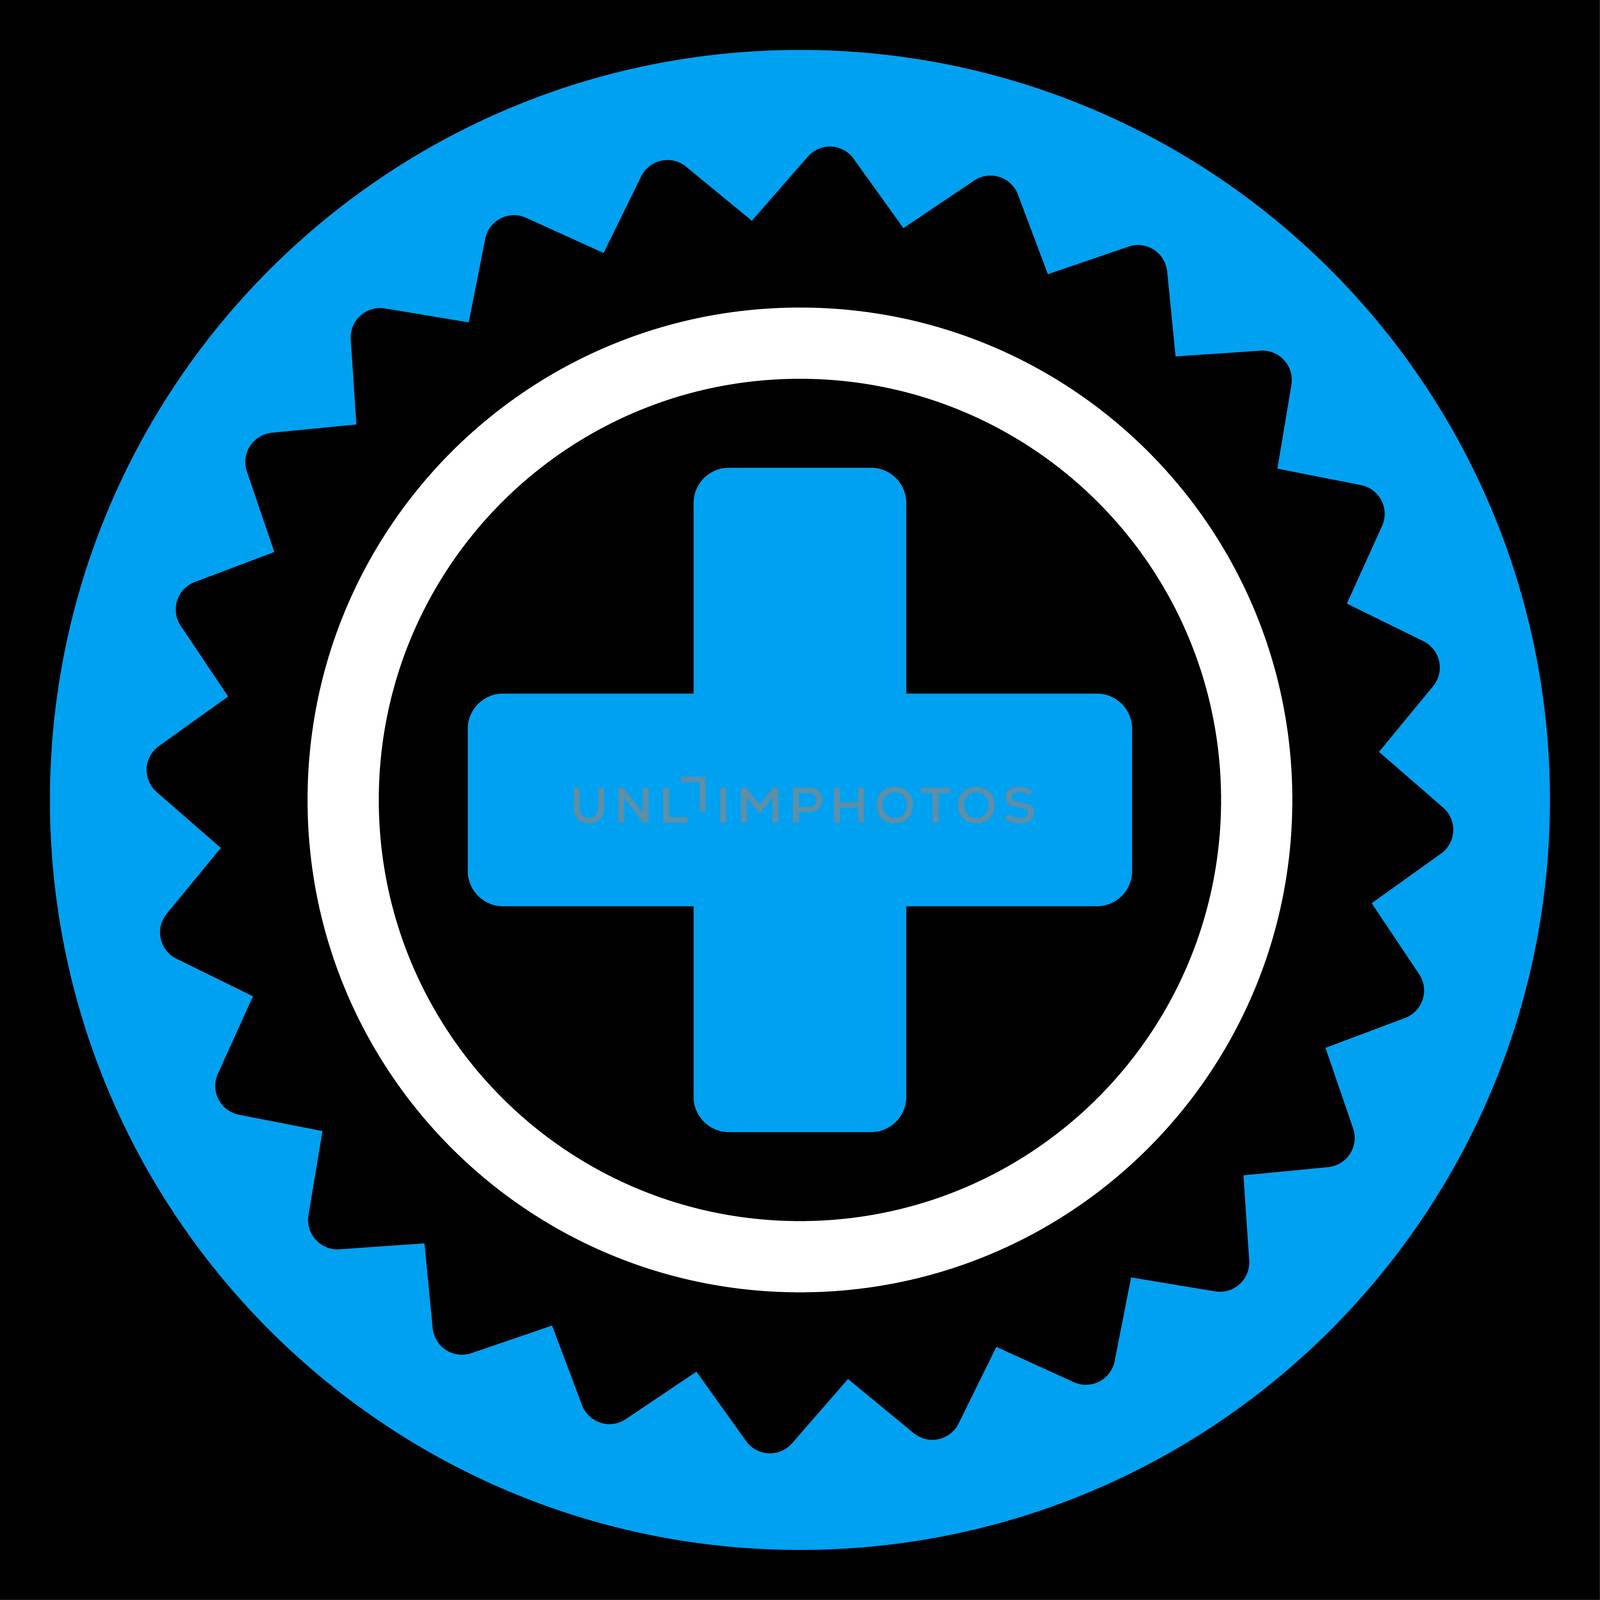 Medical Stamp raster icon. Style is bicolor flat symbol, blue and white colors, rounded angles, black background.